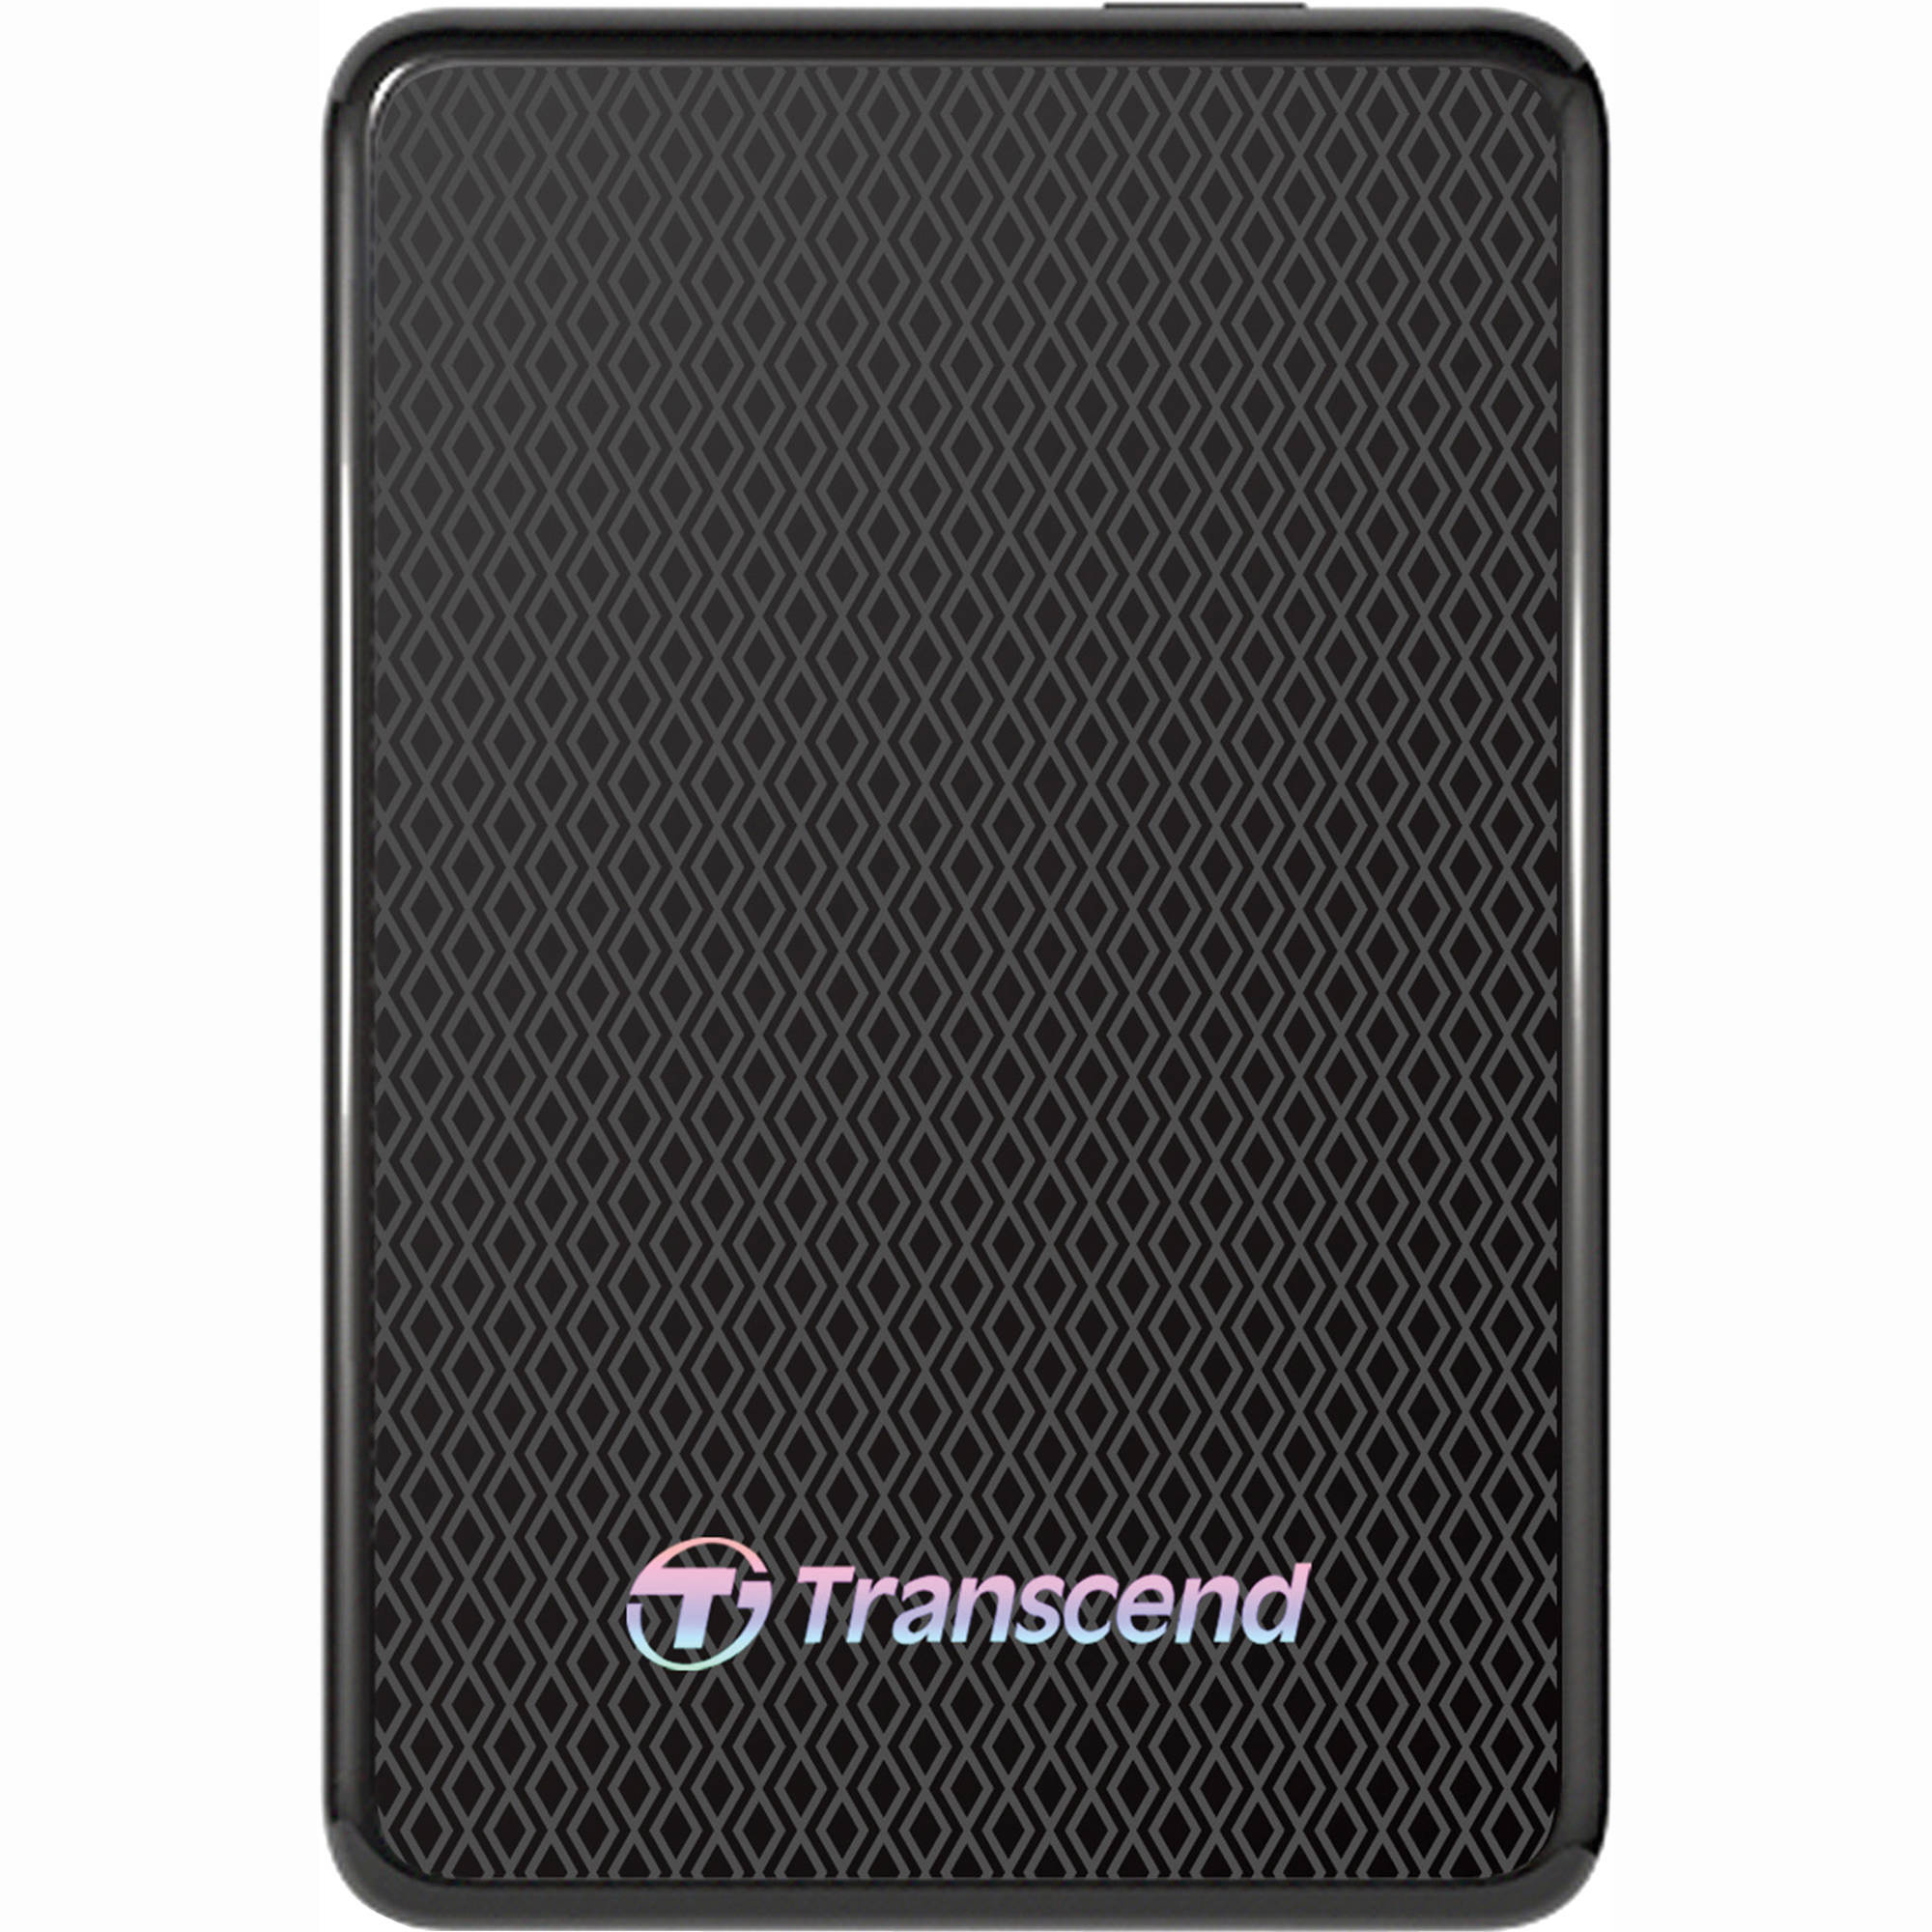 Transcend 1TB ESD400 USB 3.0 Portable Solid State Drive